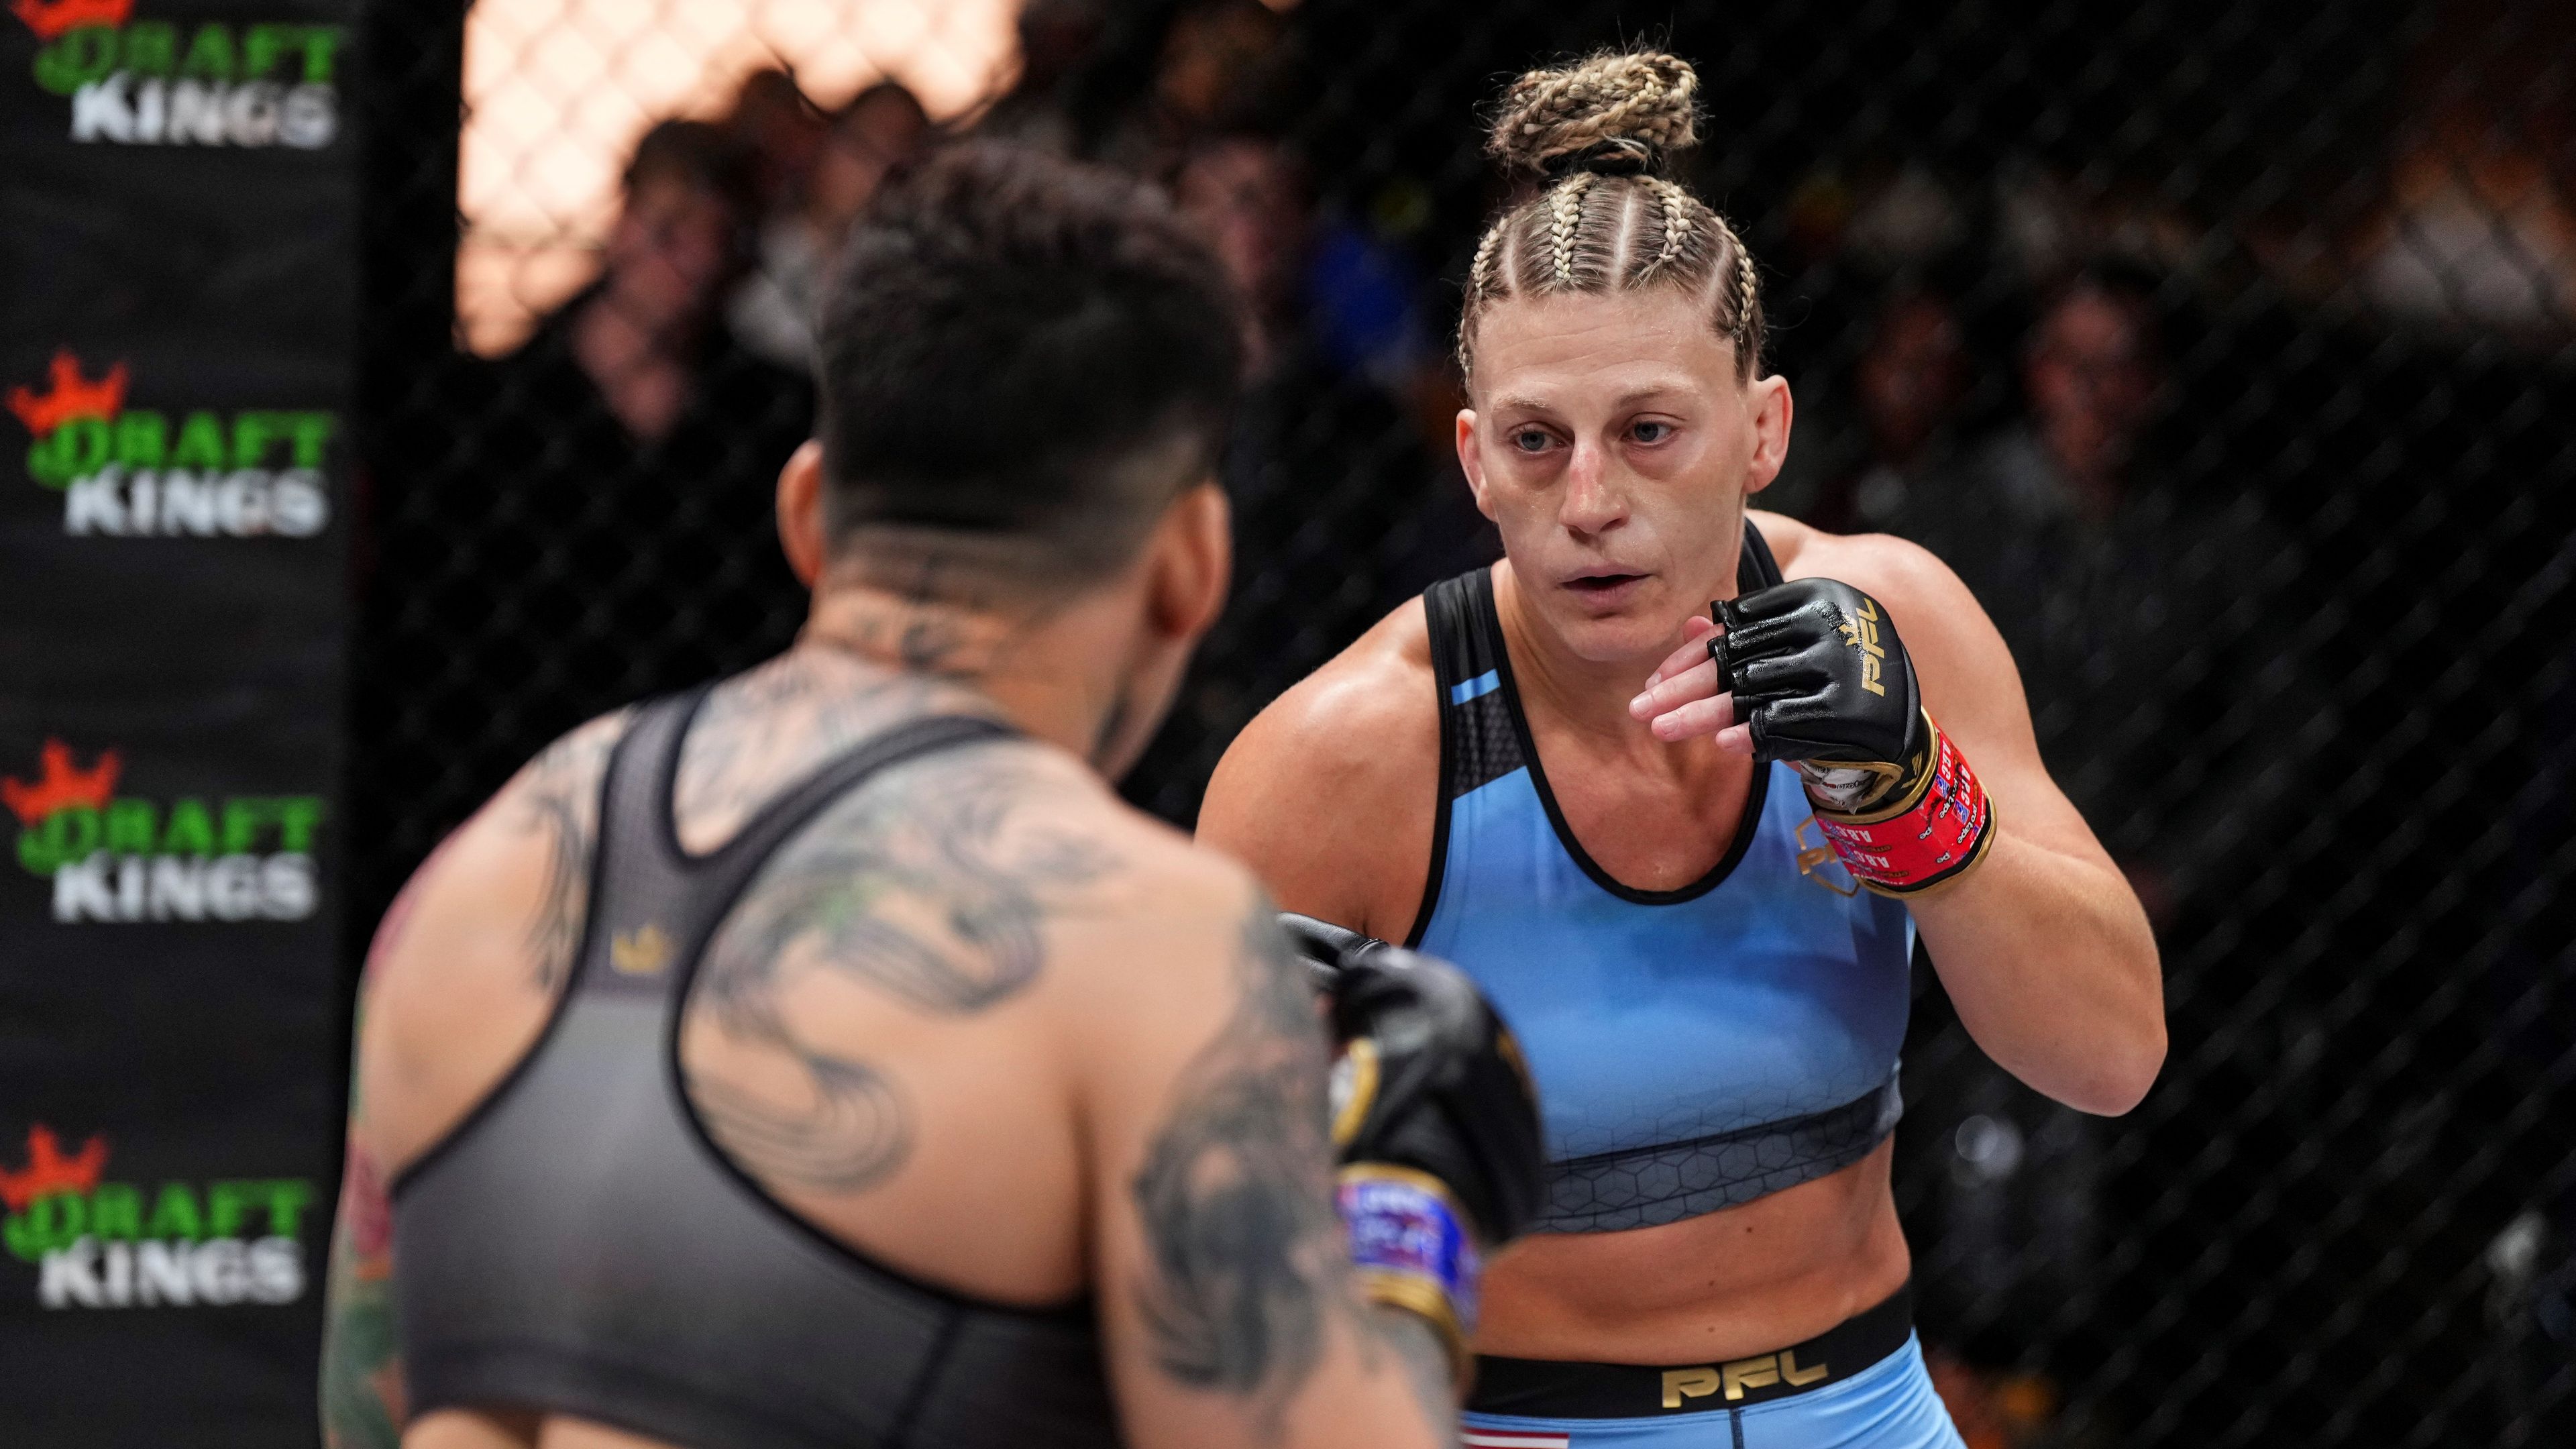 Kayla Harrison came into the lightweight PFL World Championship finale with a 15-0 record.